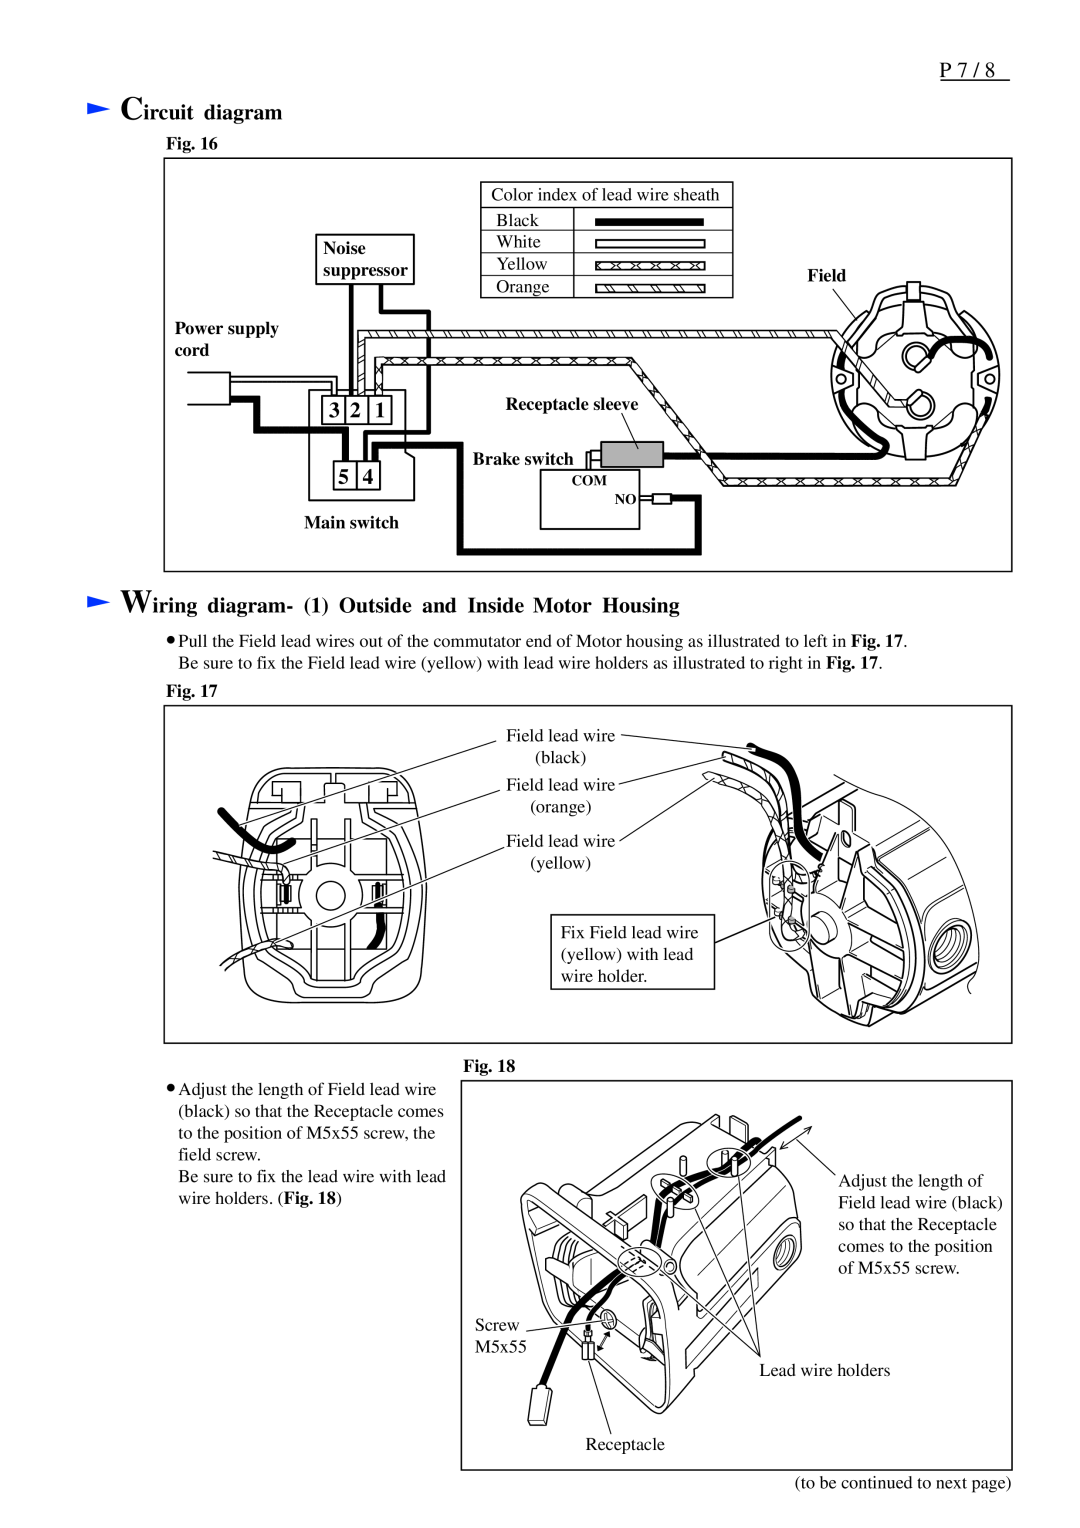 Makita UC3003A, UC4503A, UC4003A, UC3503A specifications Circuit diagram, Wiring diagram- 1 Outside and Inside Motor Housing 